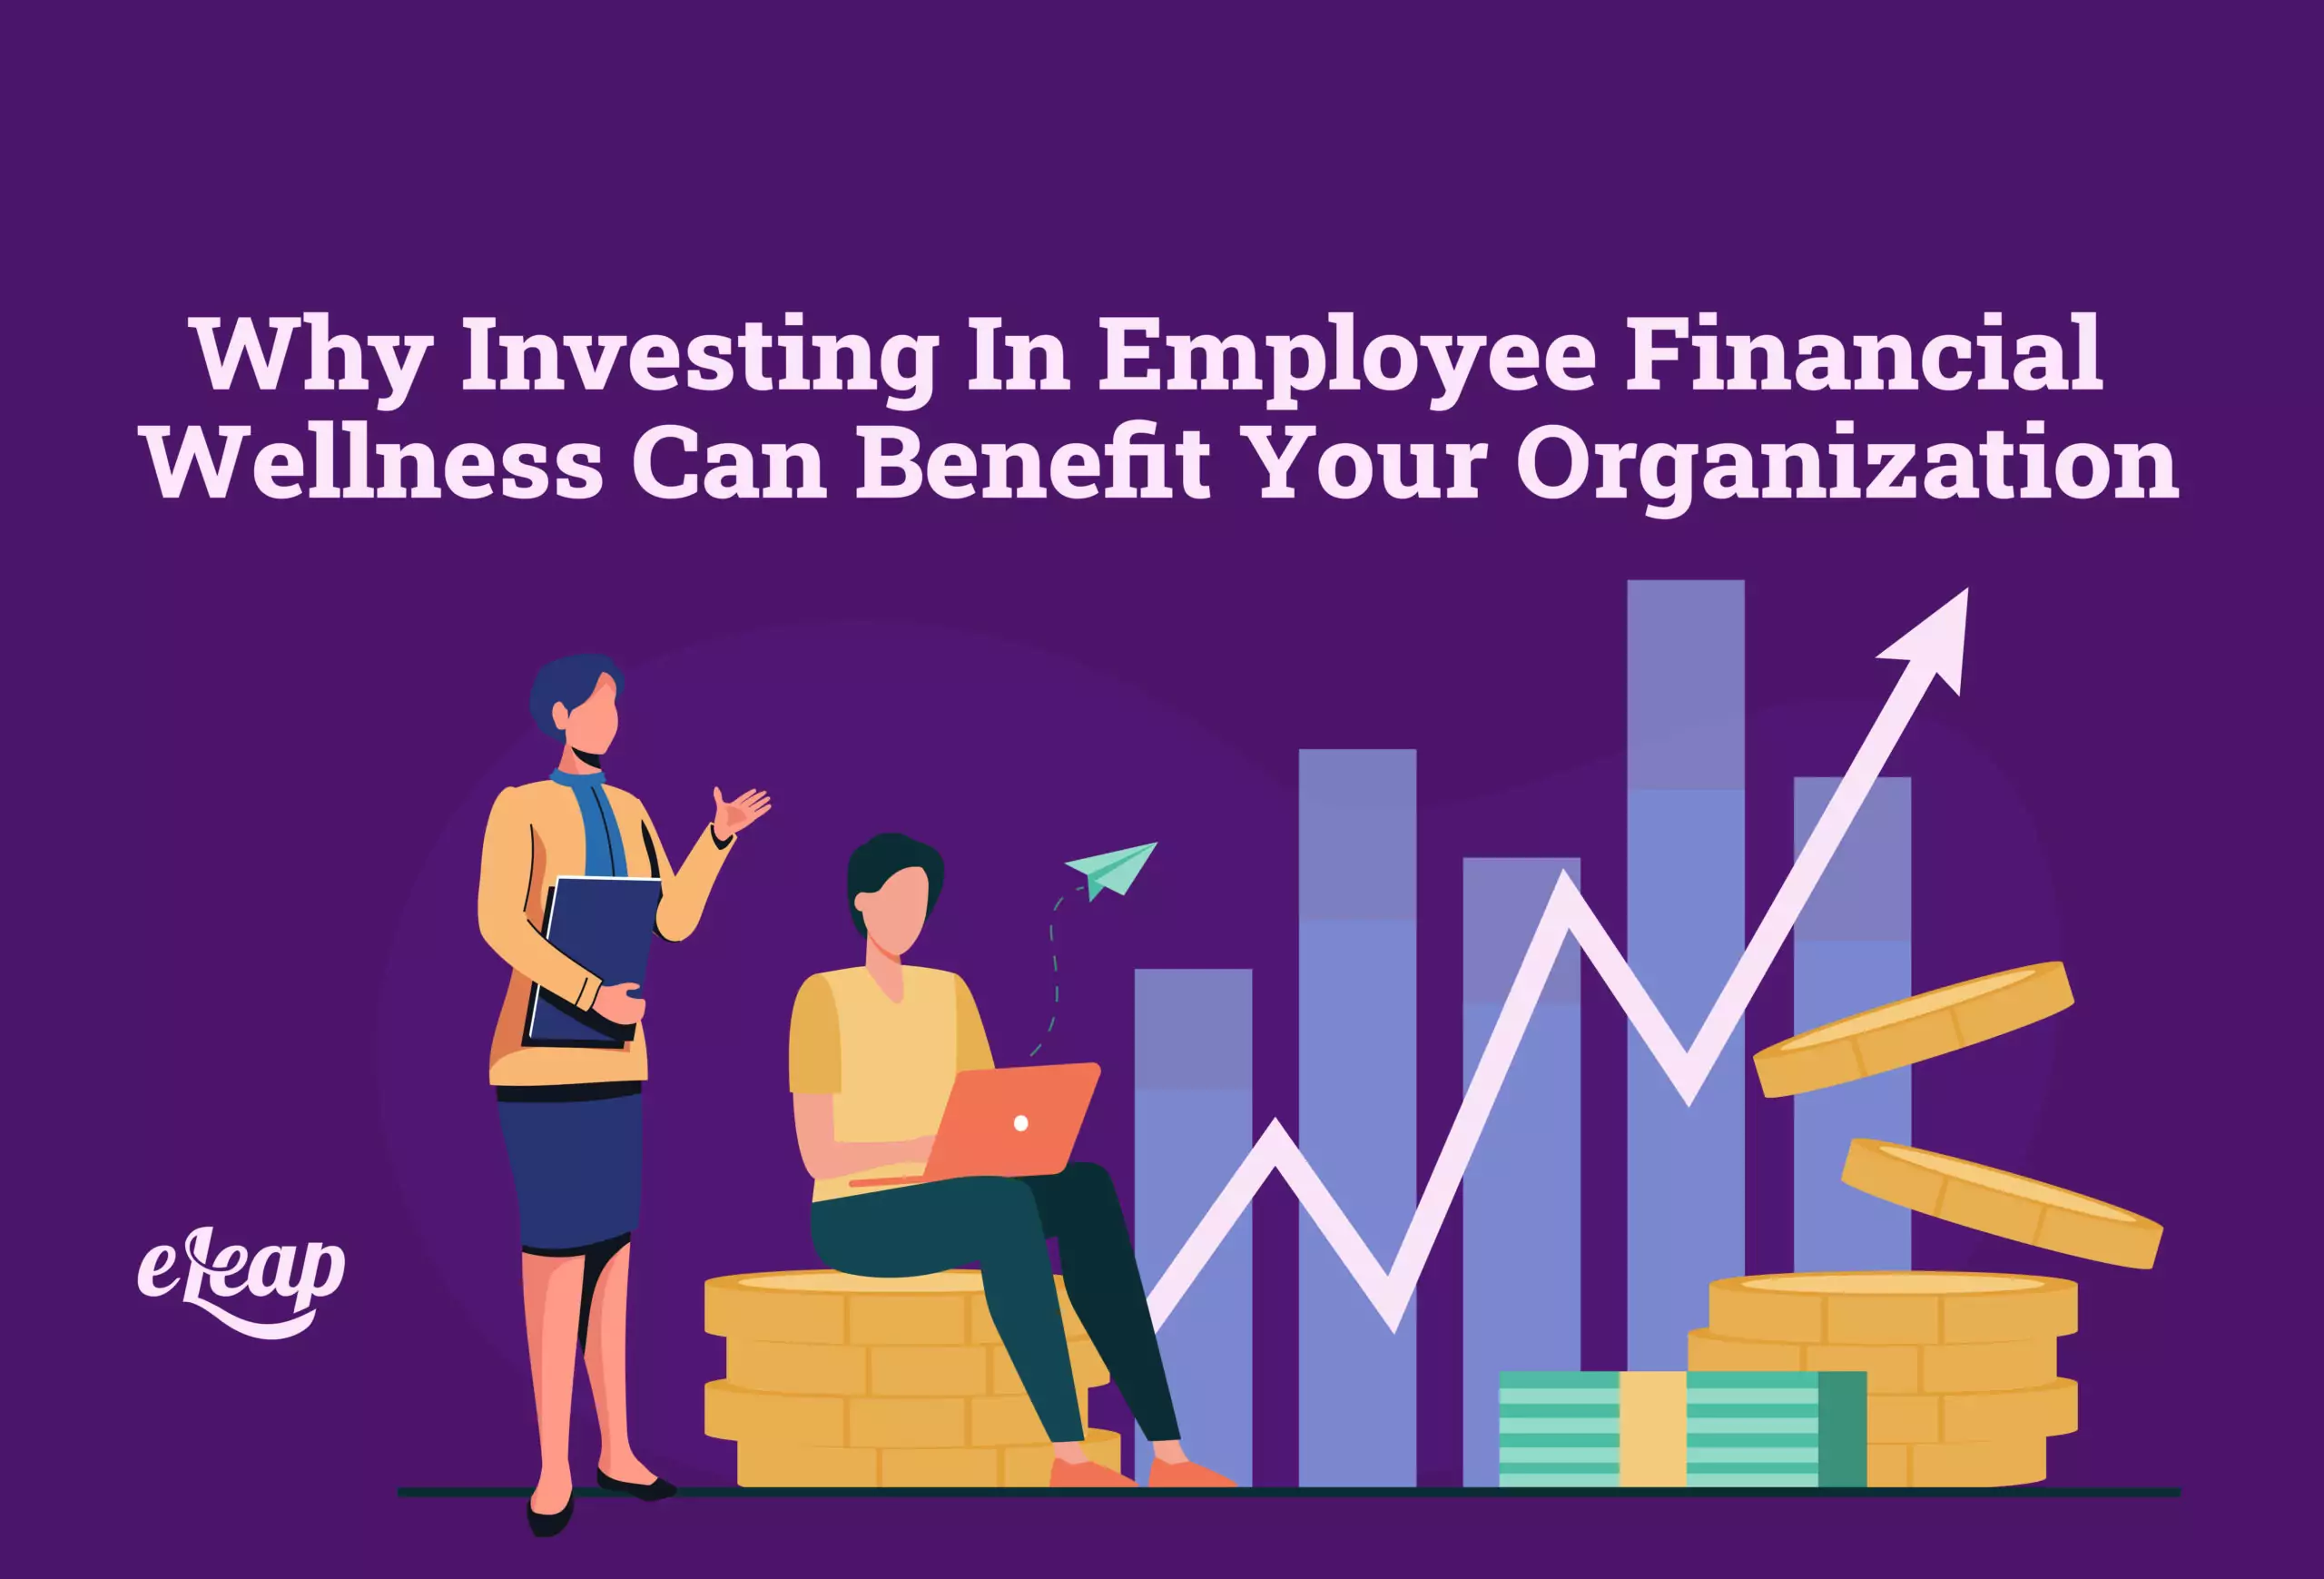 Why Investing In Employee Financial Wellness Can Benefit Your Organization